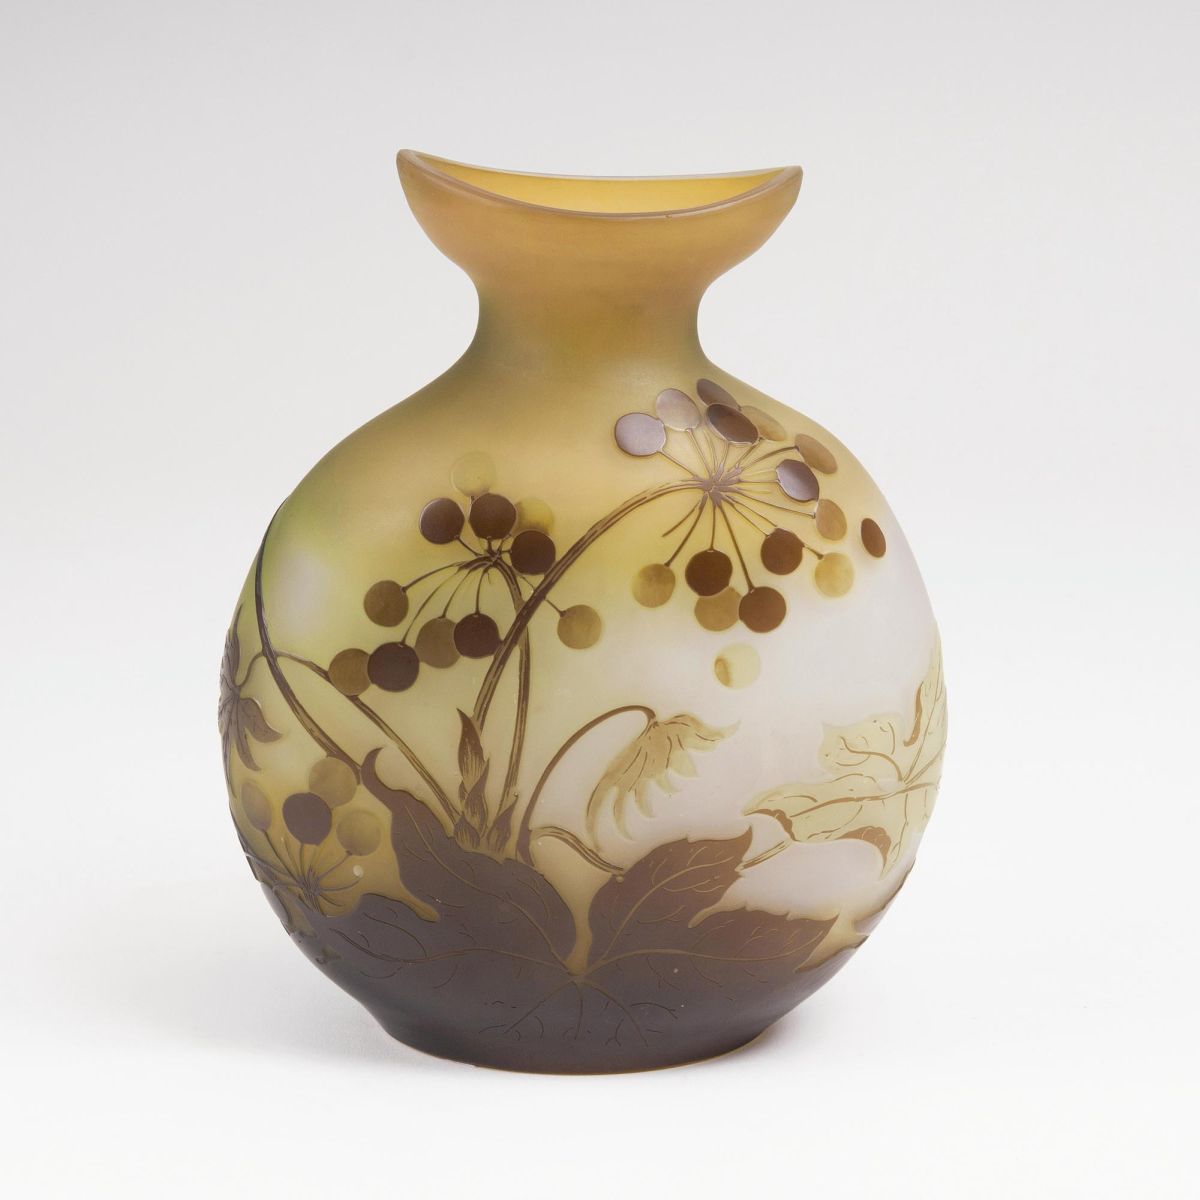 A Hearts Vase with Grapevine